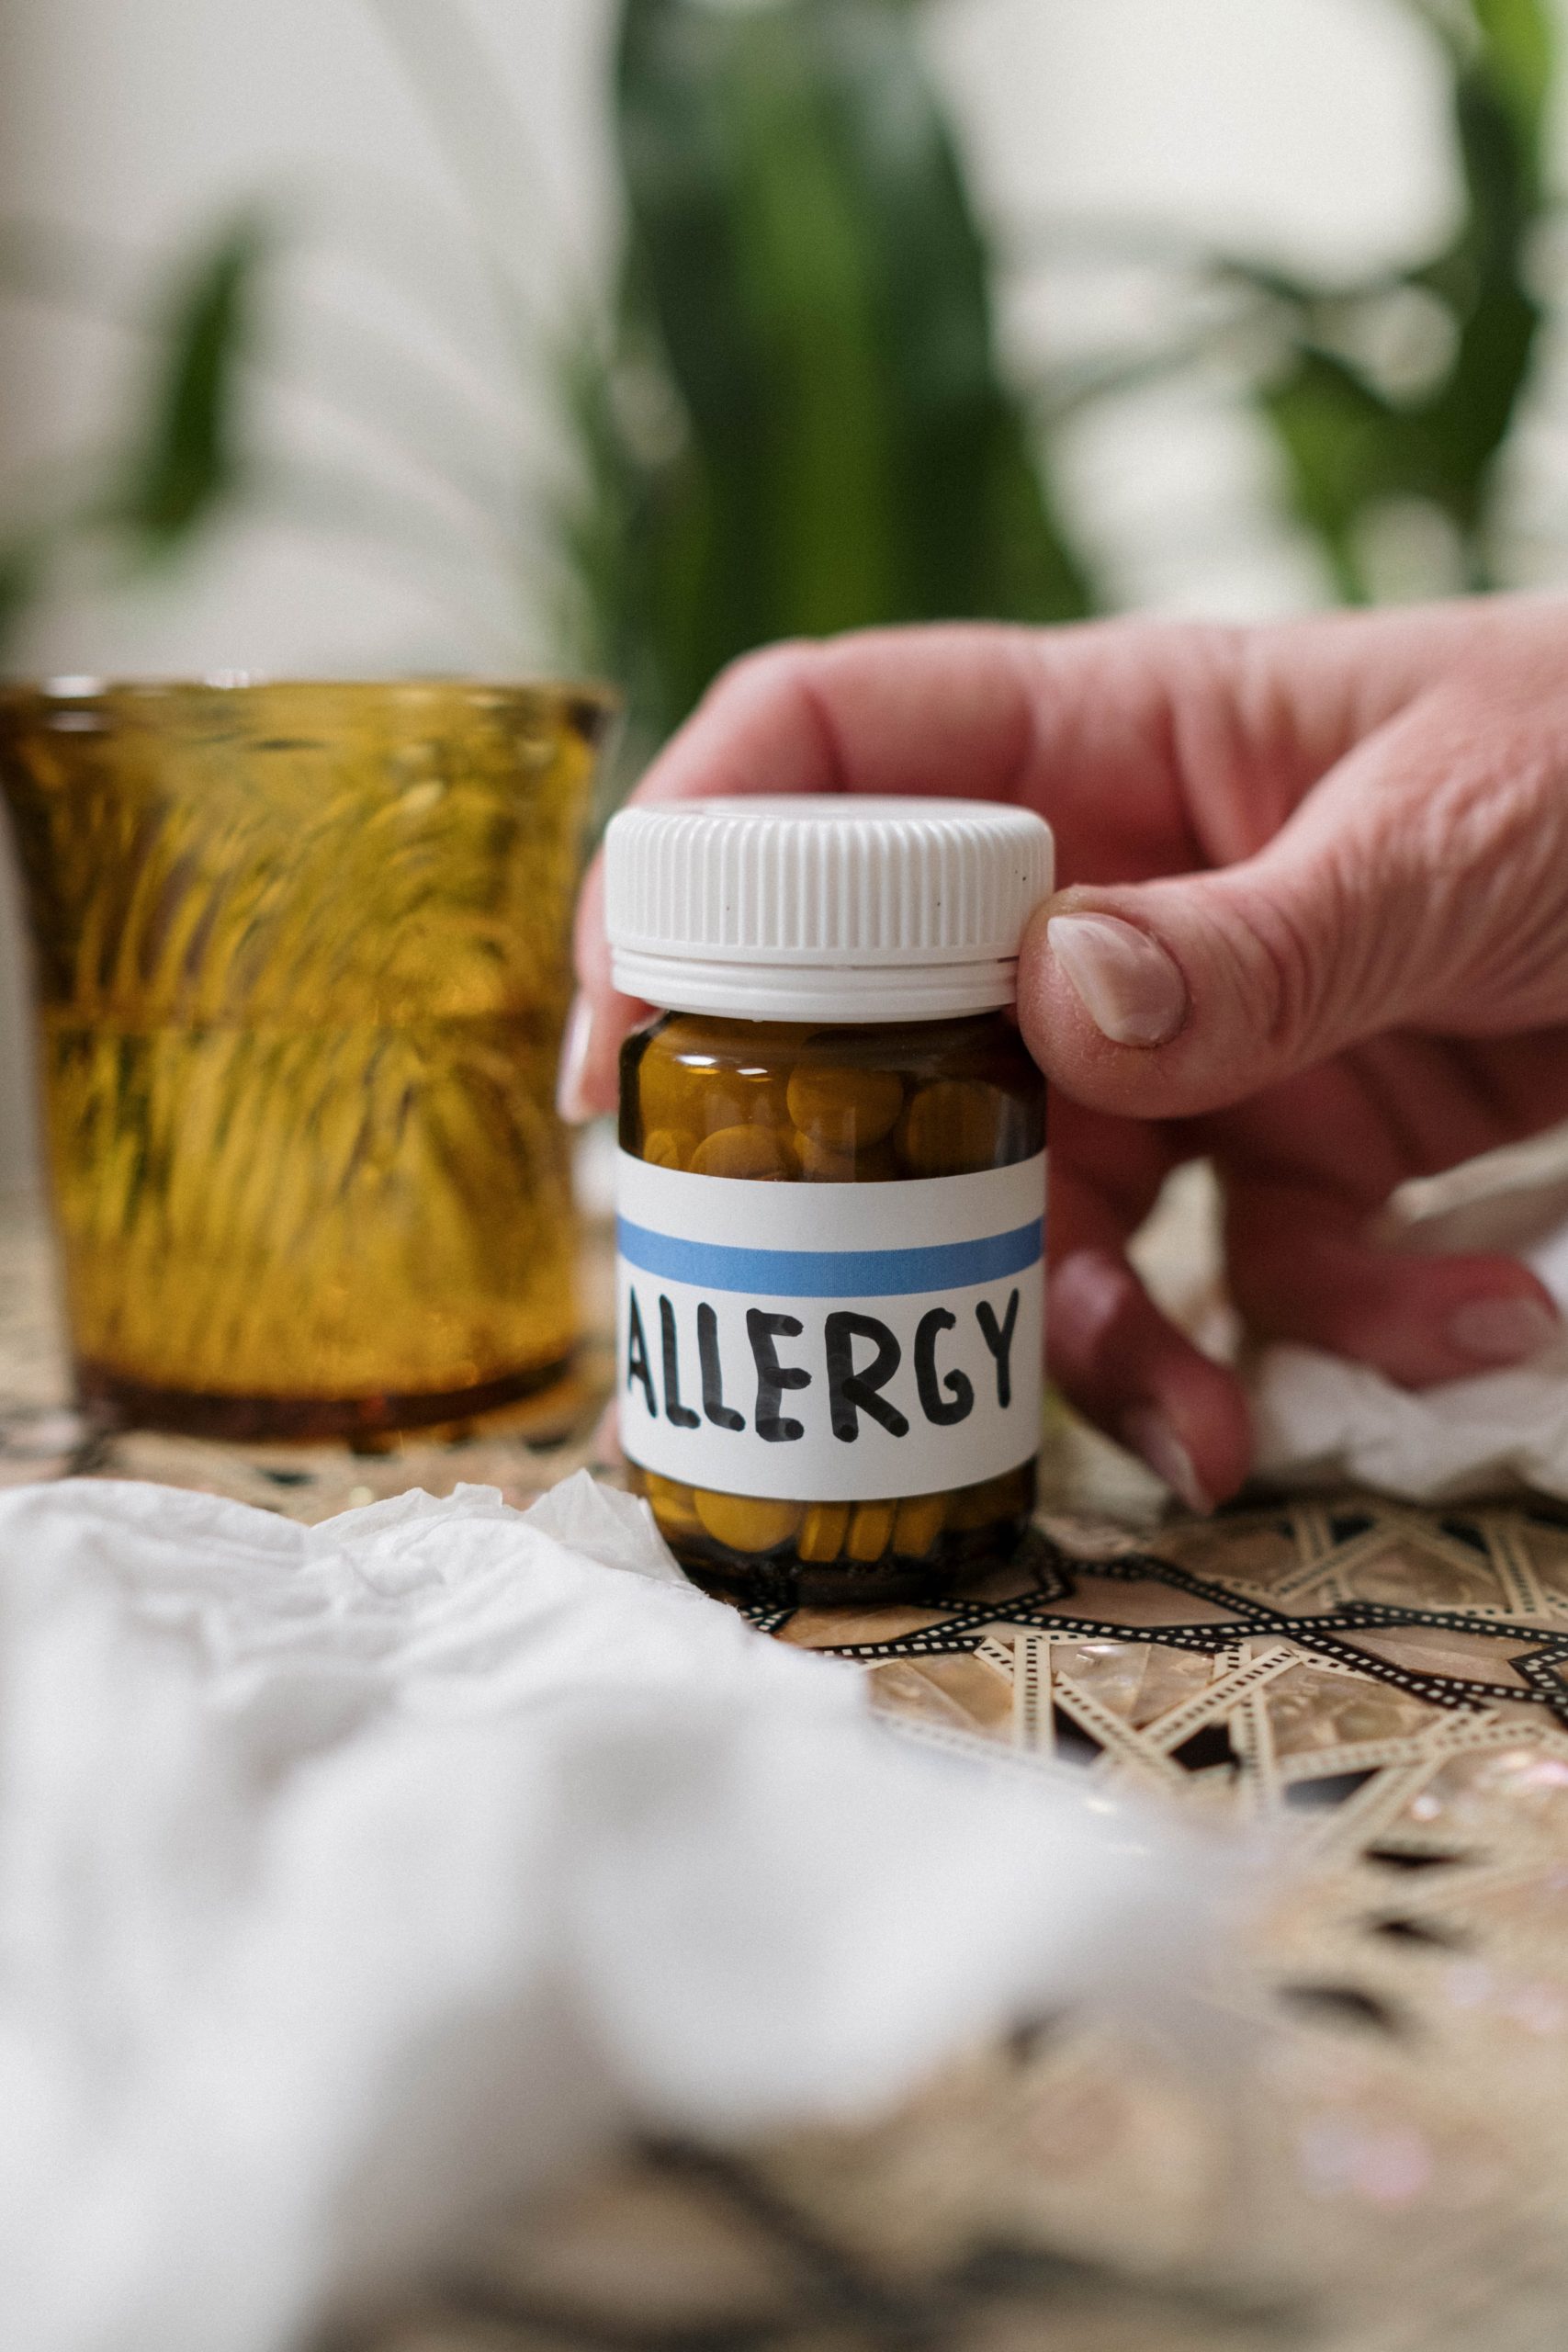 Common types of allergies and ways to treat them